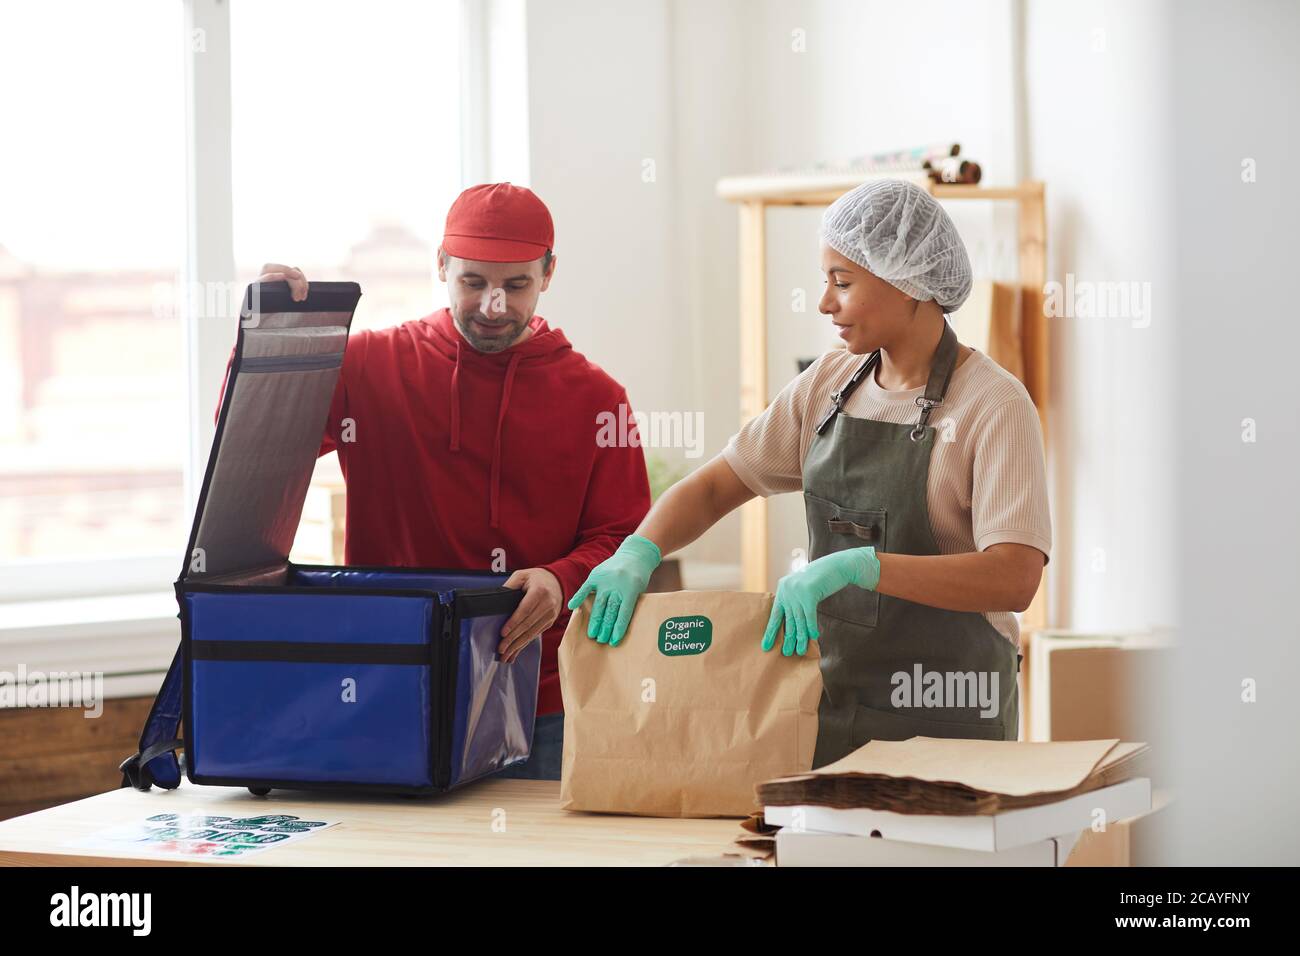 Waist up portrait of mature delivery man packing orders to cool box at food delivery service, copy space Stock Photo